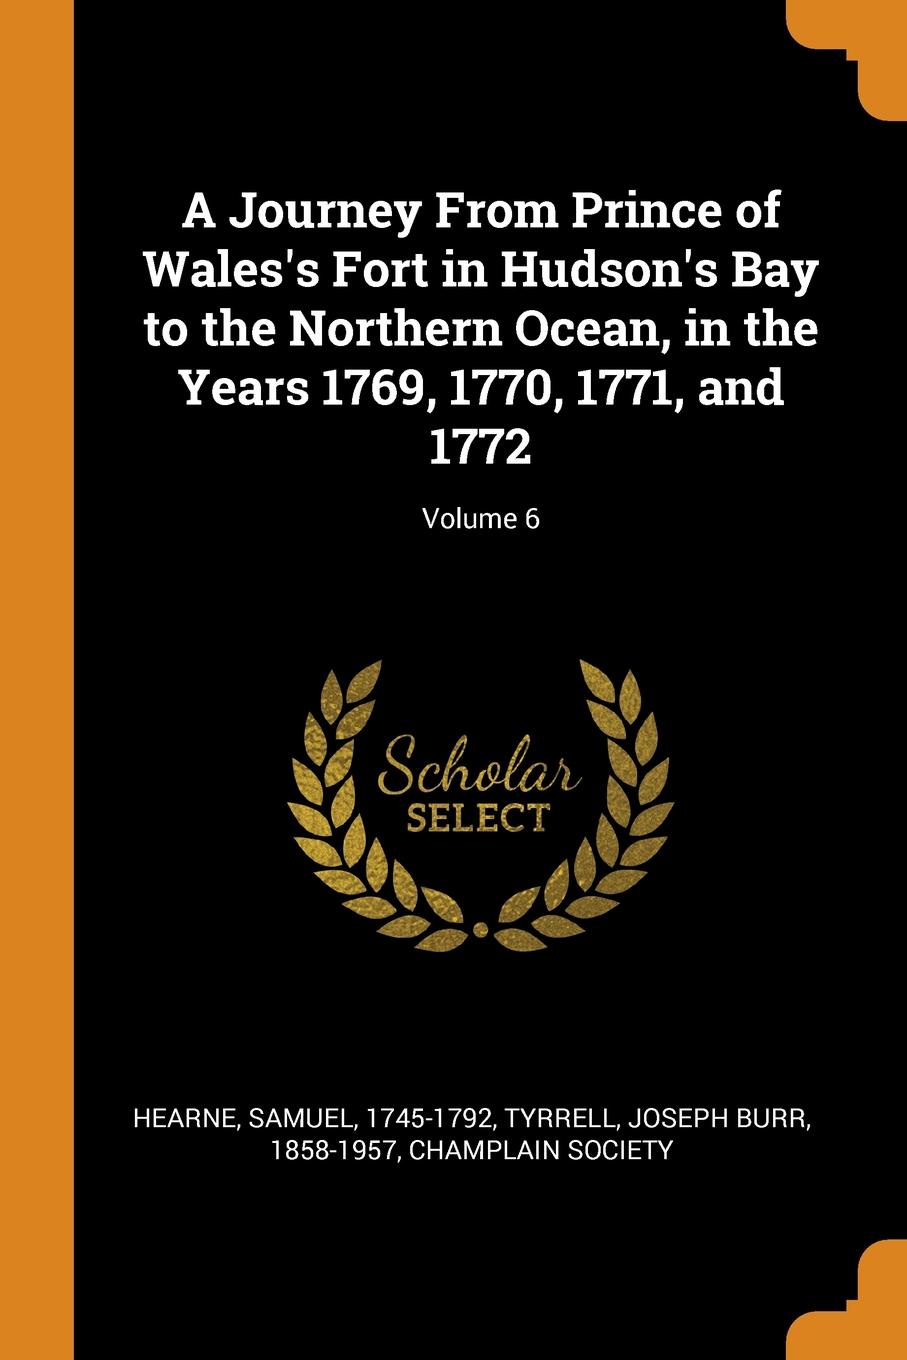 A Journey From Prince of Wales.s Fort in Hudson.s Bay to the Northern Ocean, in the Years 1769, 1770, 1771, and 1772; Volume 6